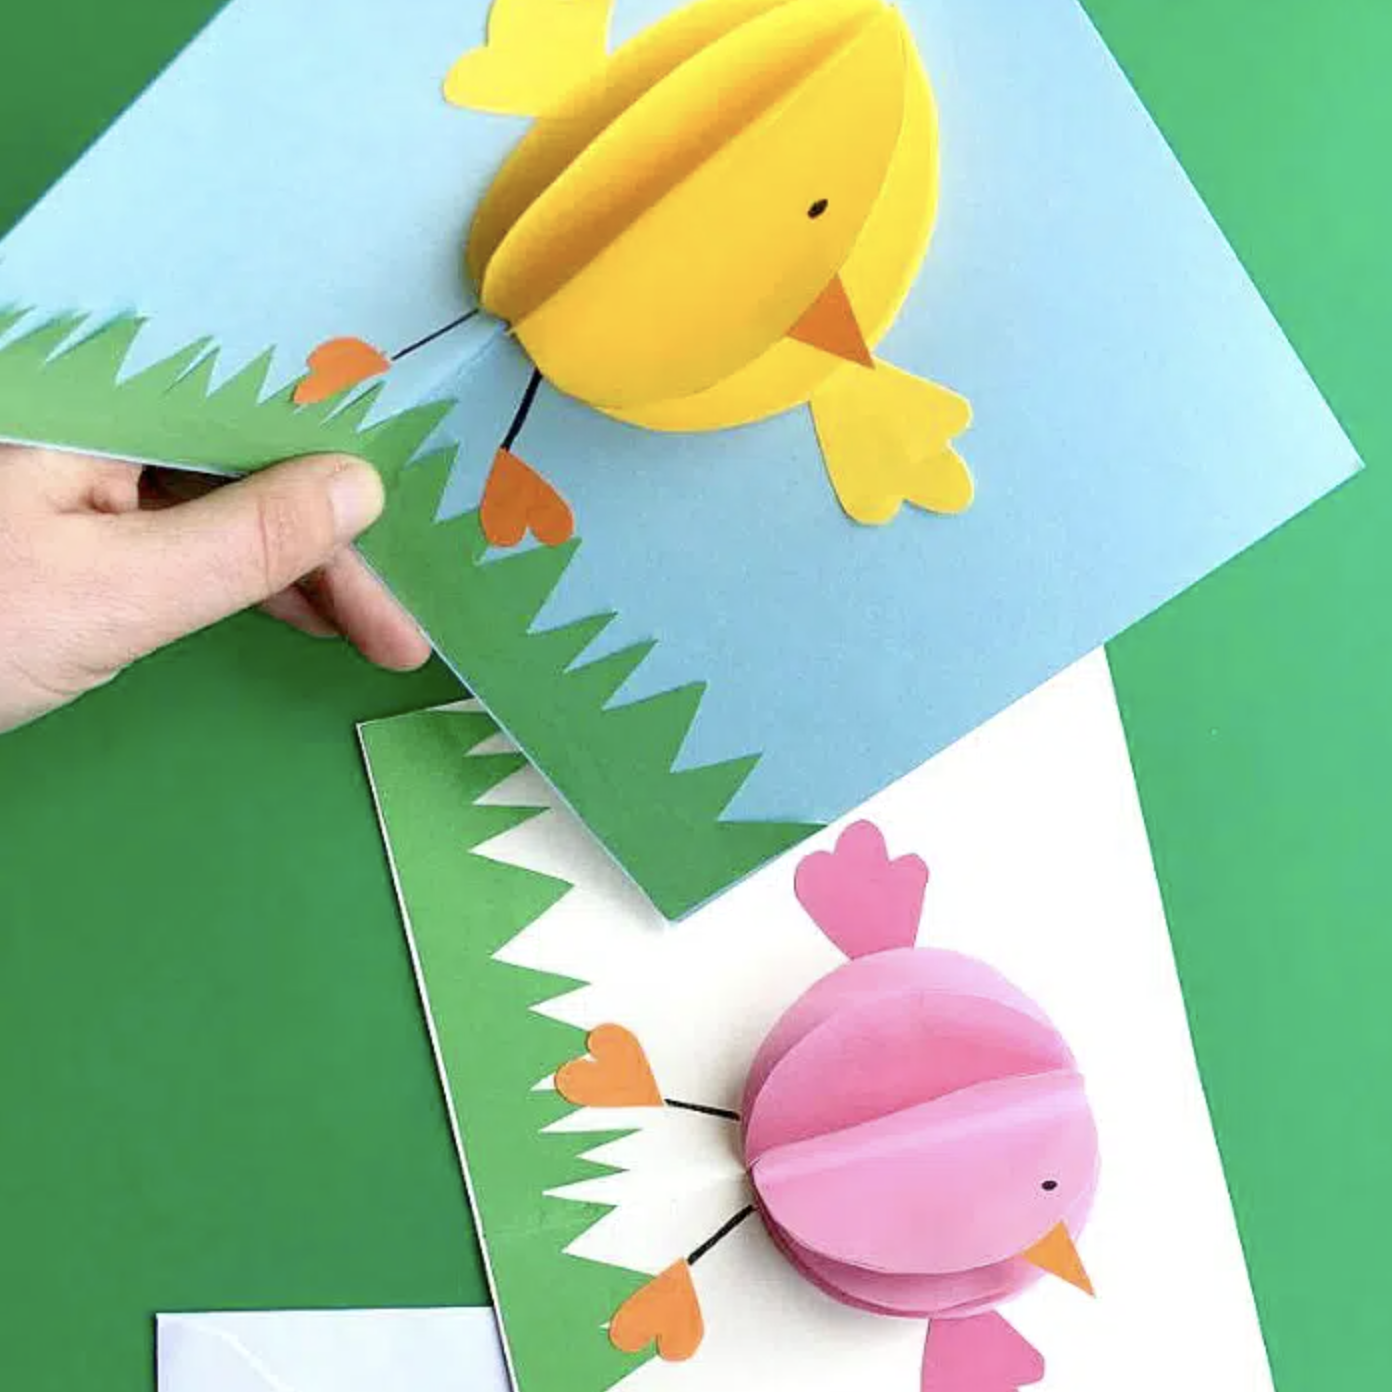 Little Child Made Paper Crafts For Mother's Day Or Birthday. Child